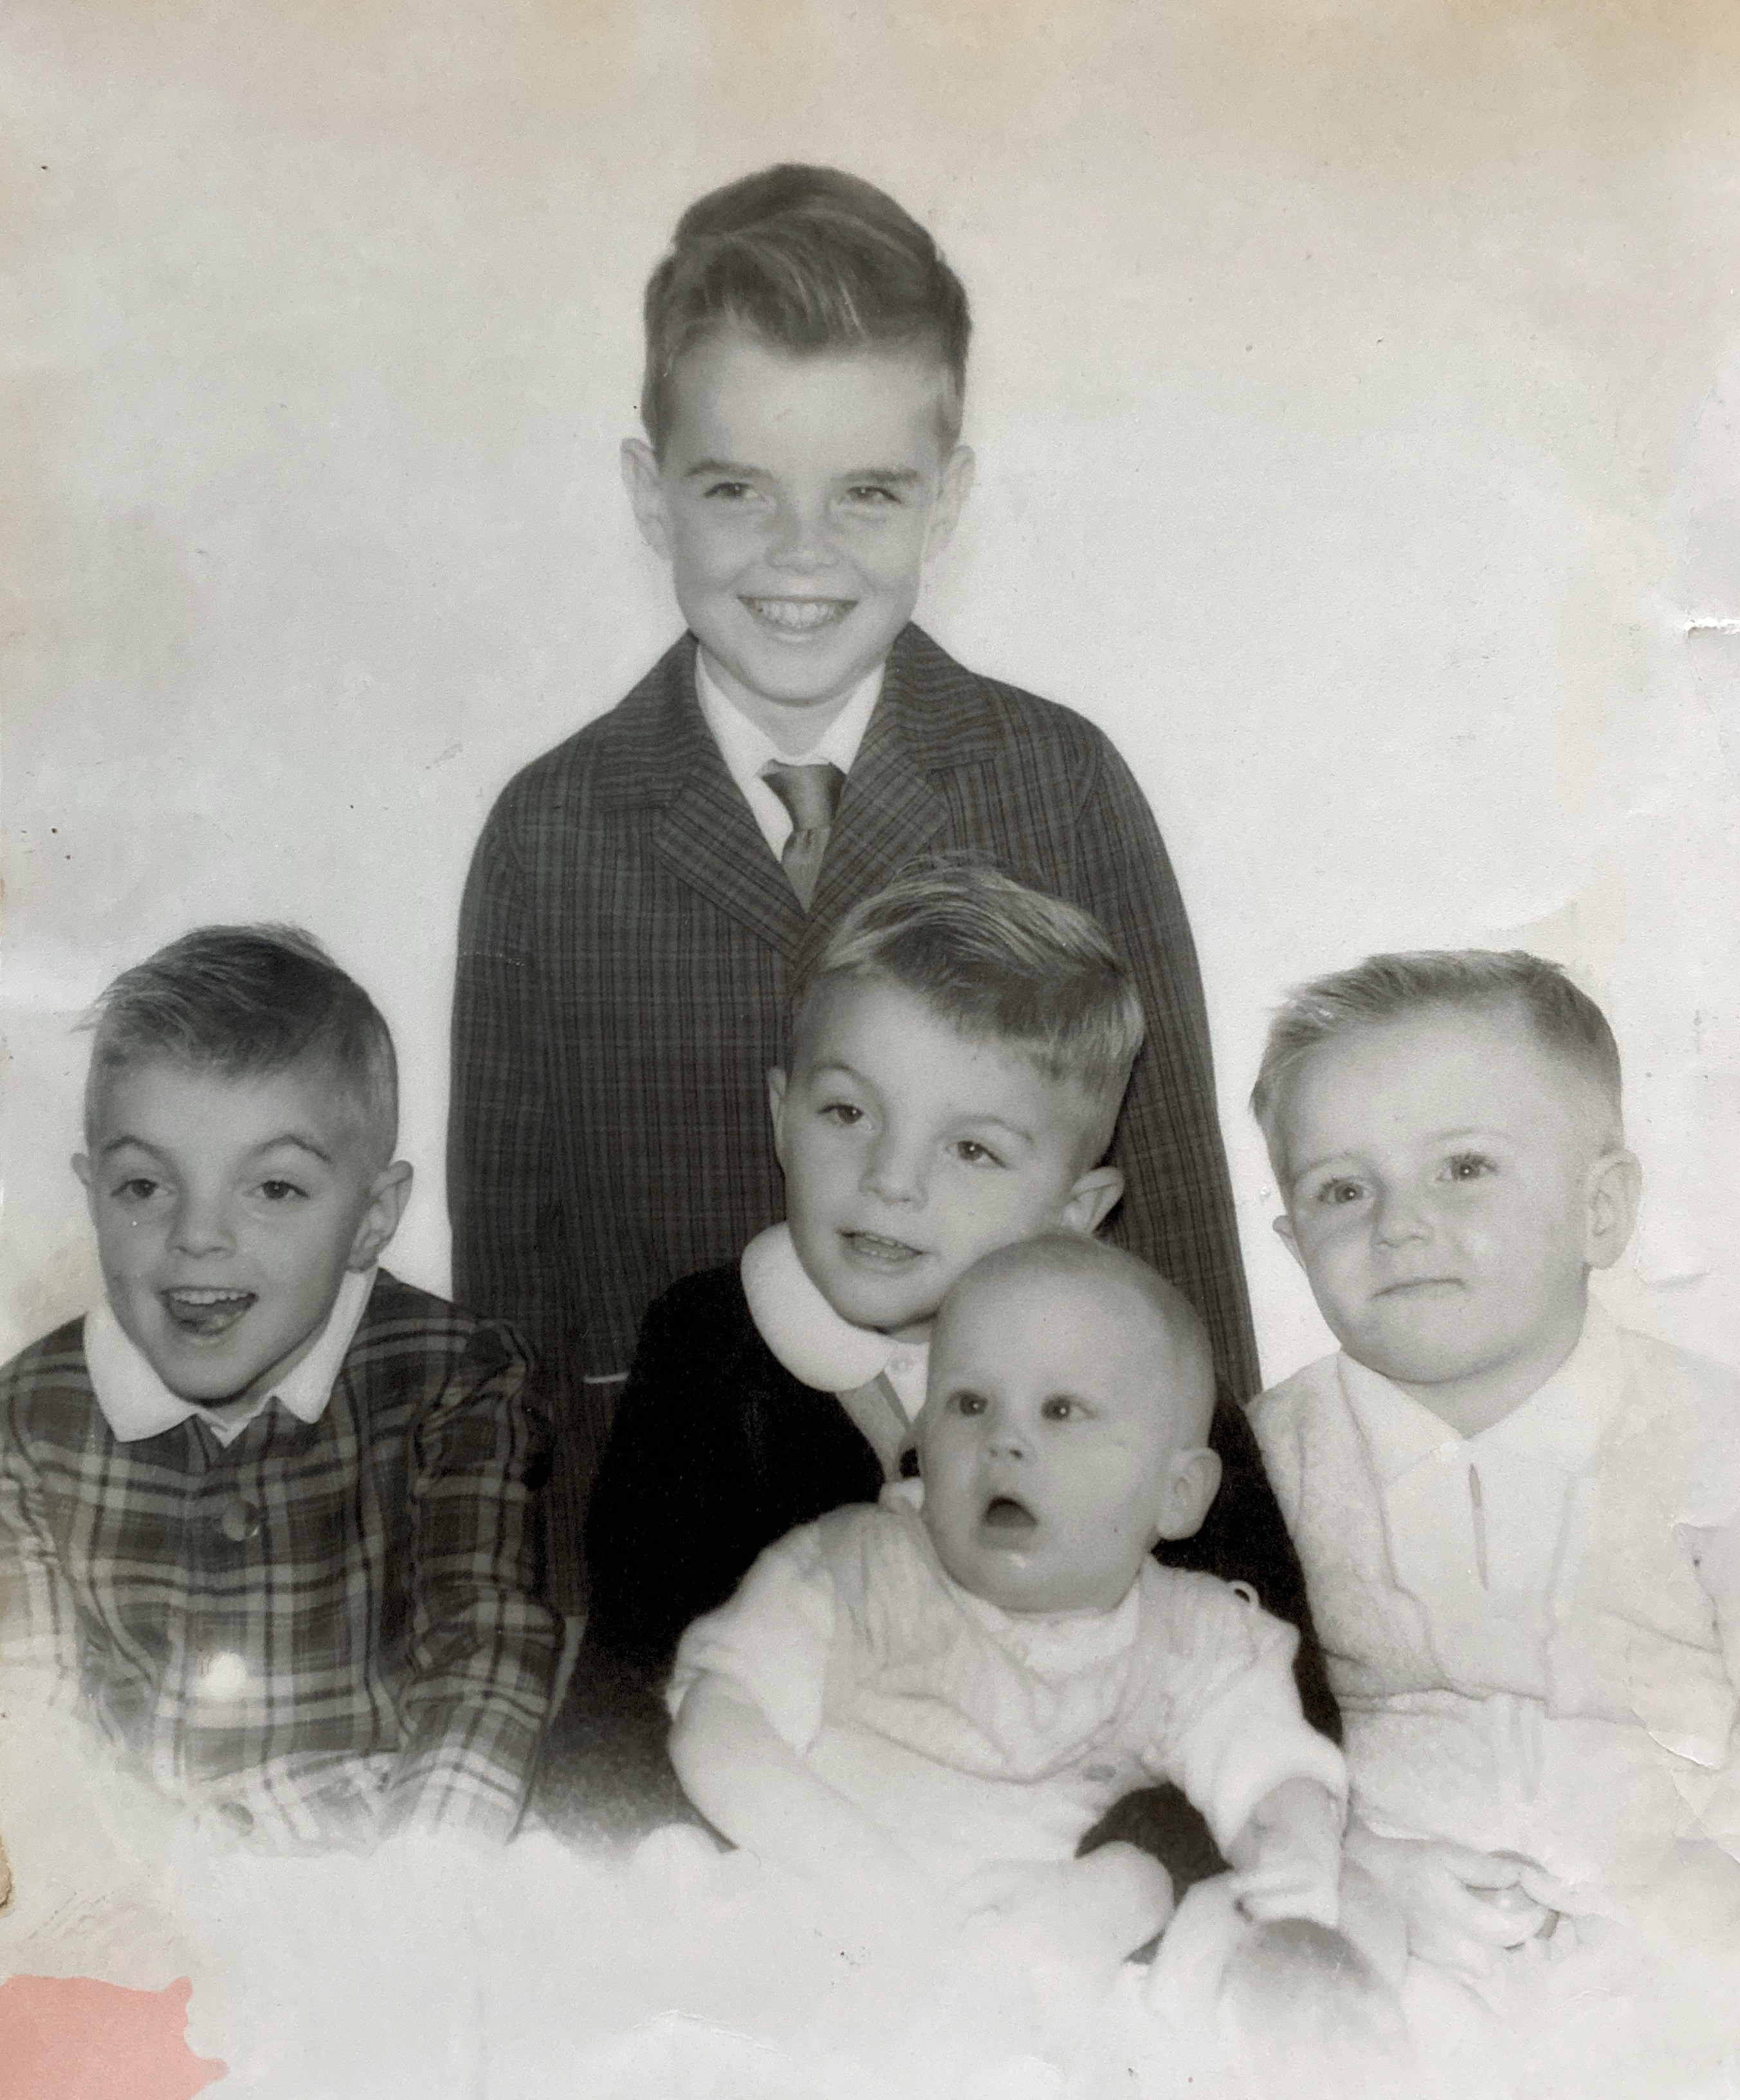 Tom Tkach-7 at the top second row left George Tkach-6, Tim Tkach-5, Dan Tkach-3, and the baby is Mike Tkach. This is the second half of 1962 because Mike is six months or less in age and he was born June 9, 1962